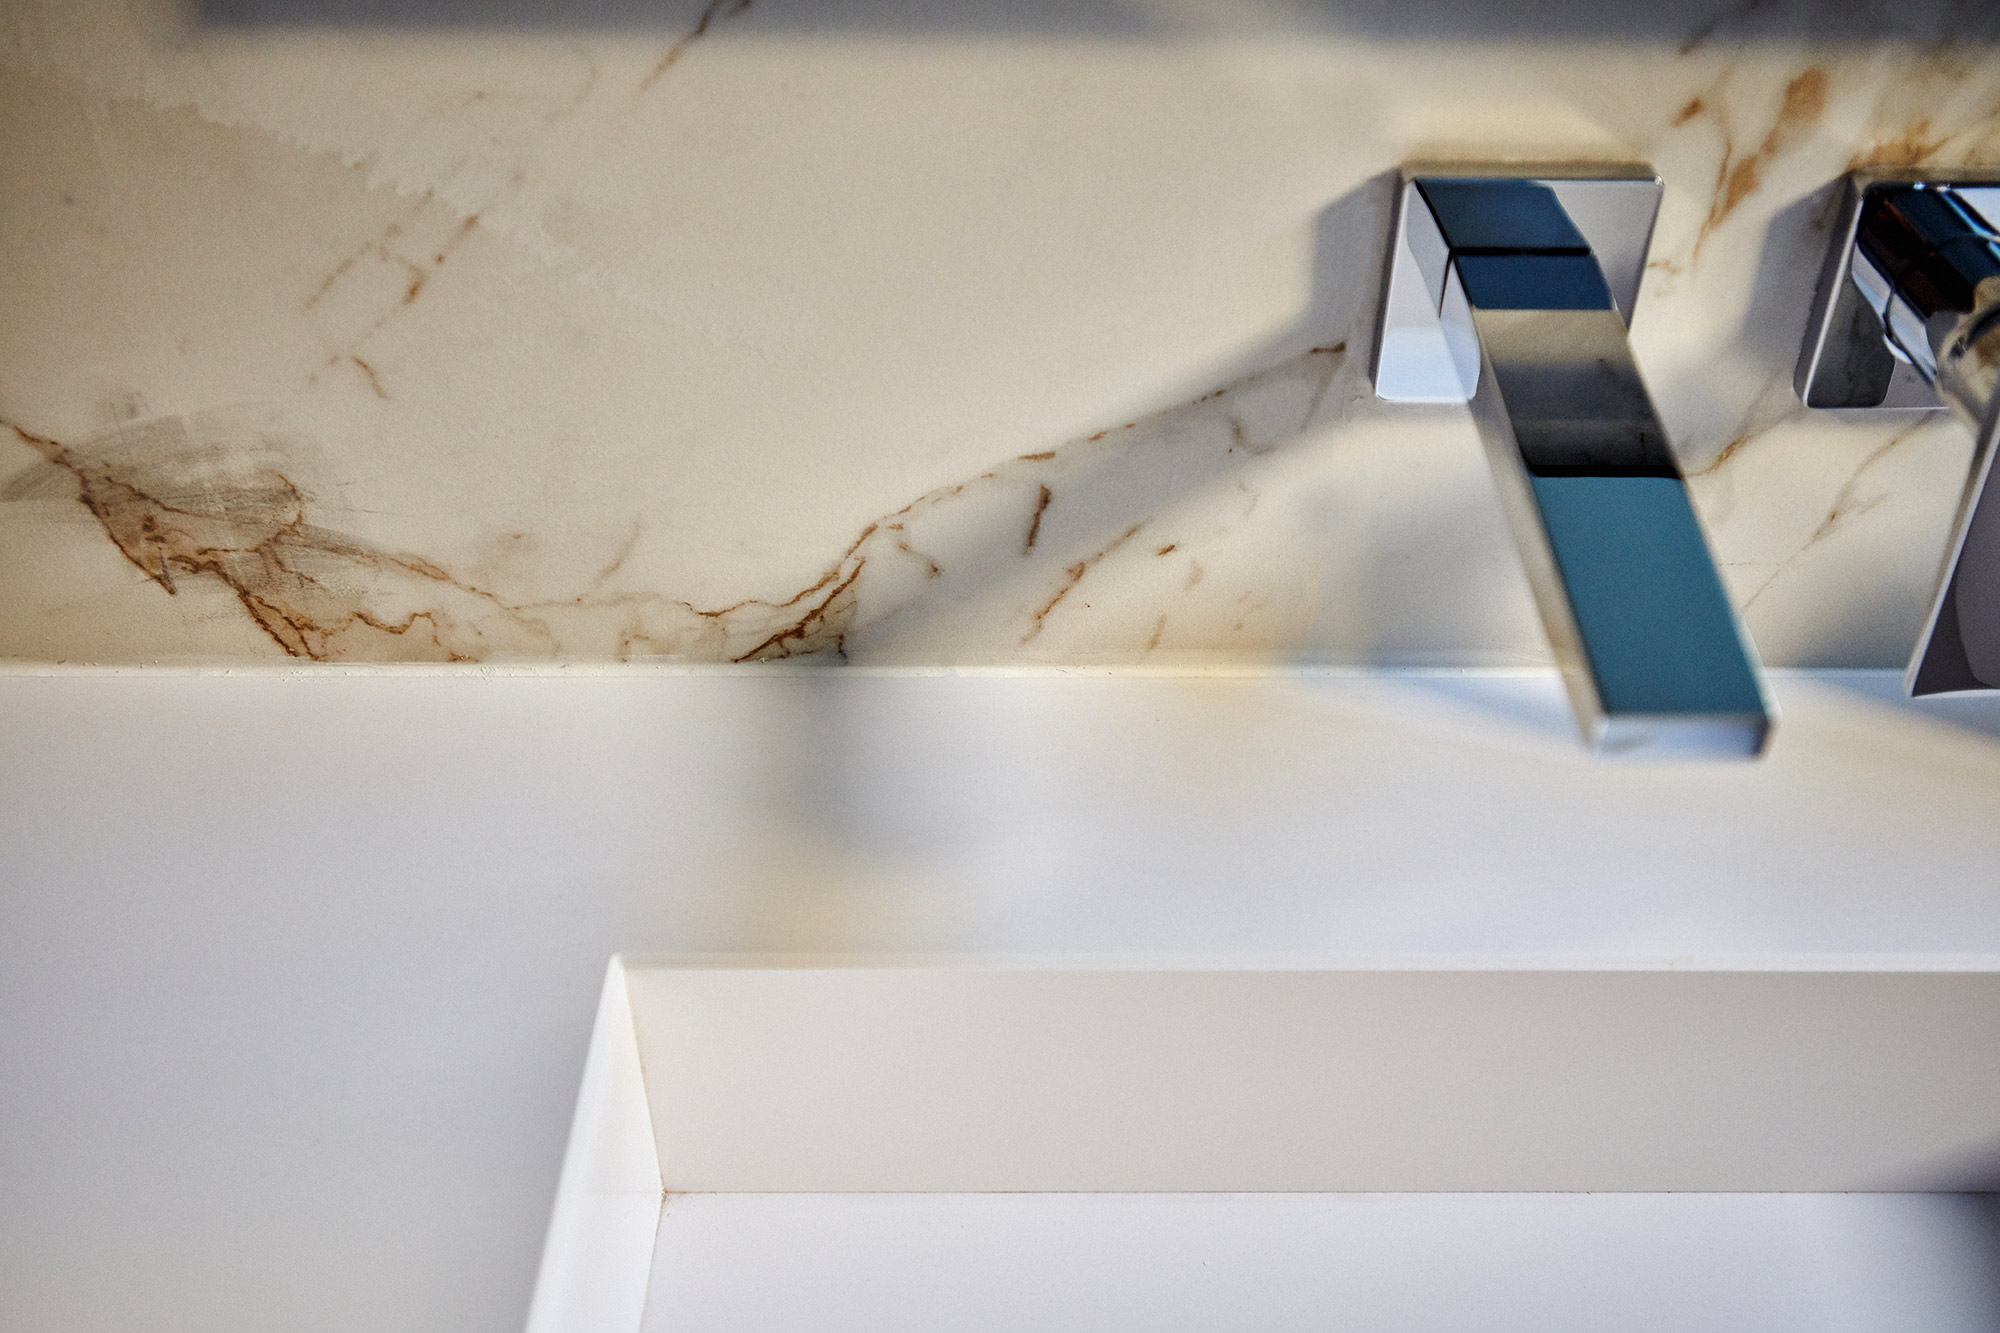 Image of aedas homes bano silestone entzo 2 in Cosentino, the star of the new functional, modern and sustainable house in the AEDAS Homes showroom in Madrid - Cosentino